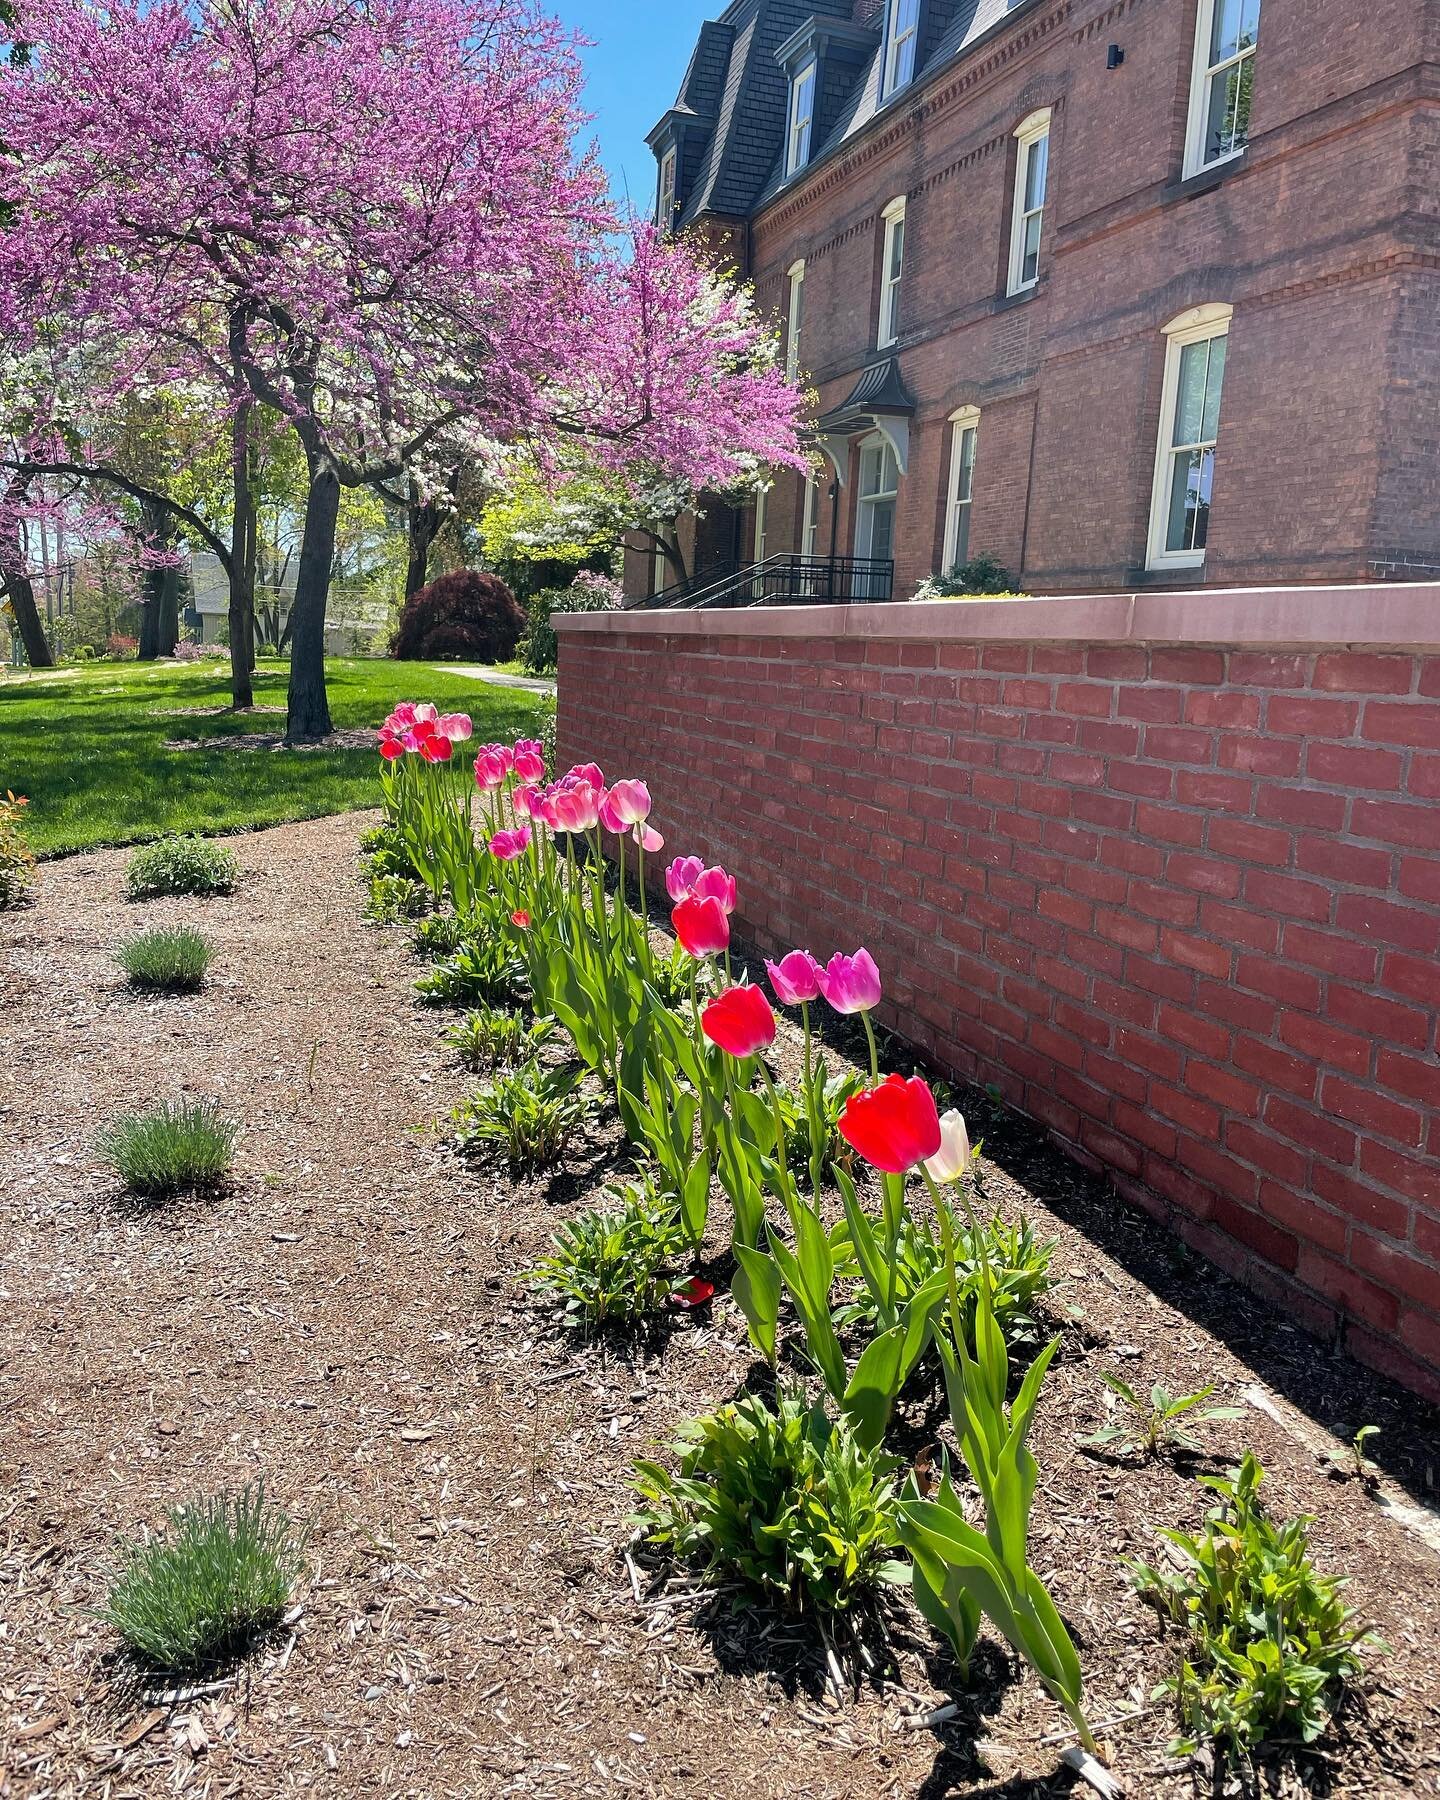 Waiting for these tulips to pop like last year.  Please be mindful of all the beds around the campus, each one having its own unique tulip planting!